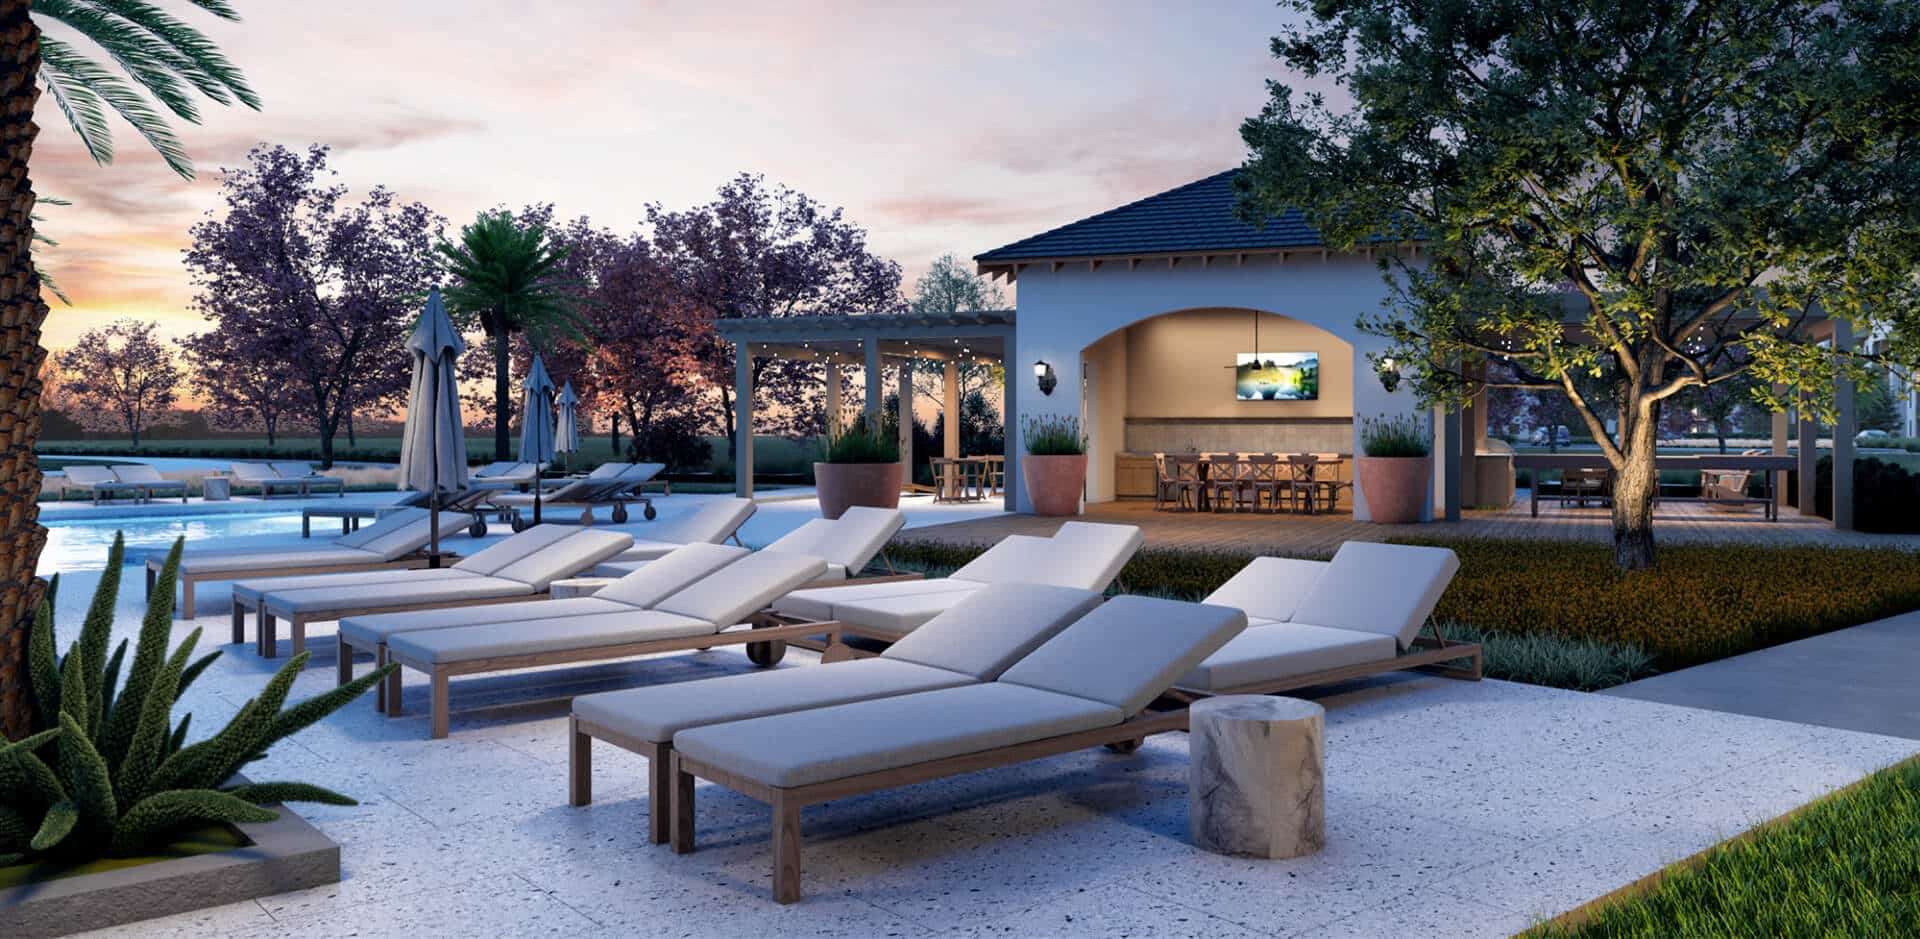 lounge chairs next to a community outdoor dining space and pool at Soluna Apartments